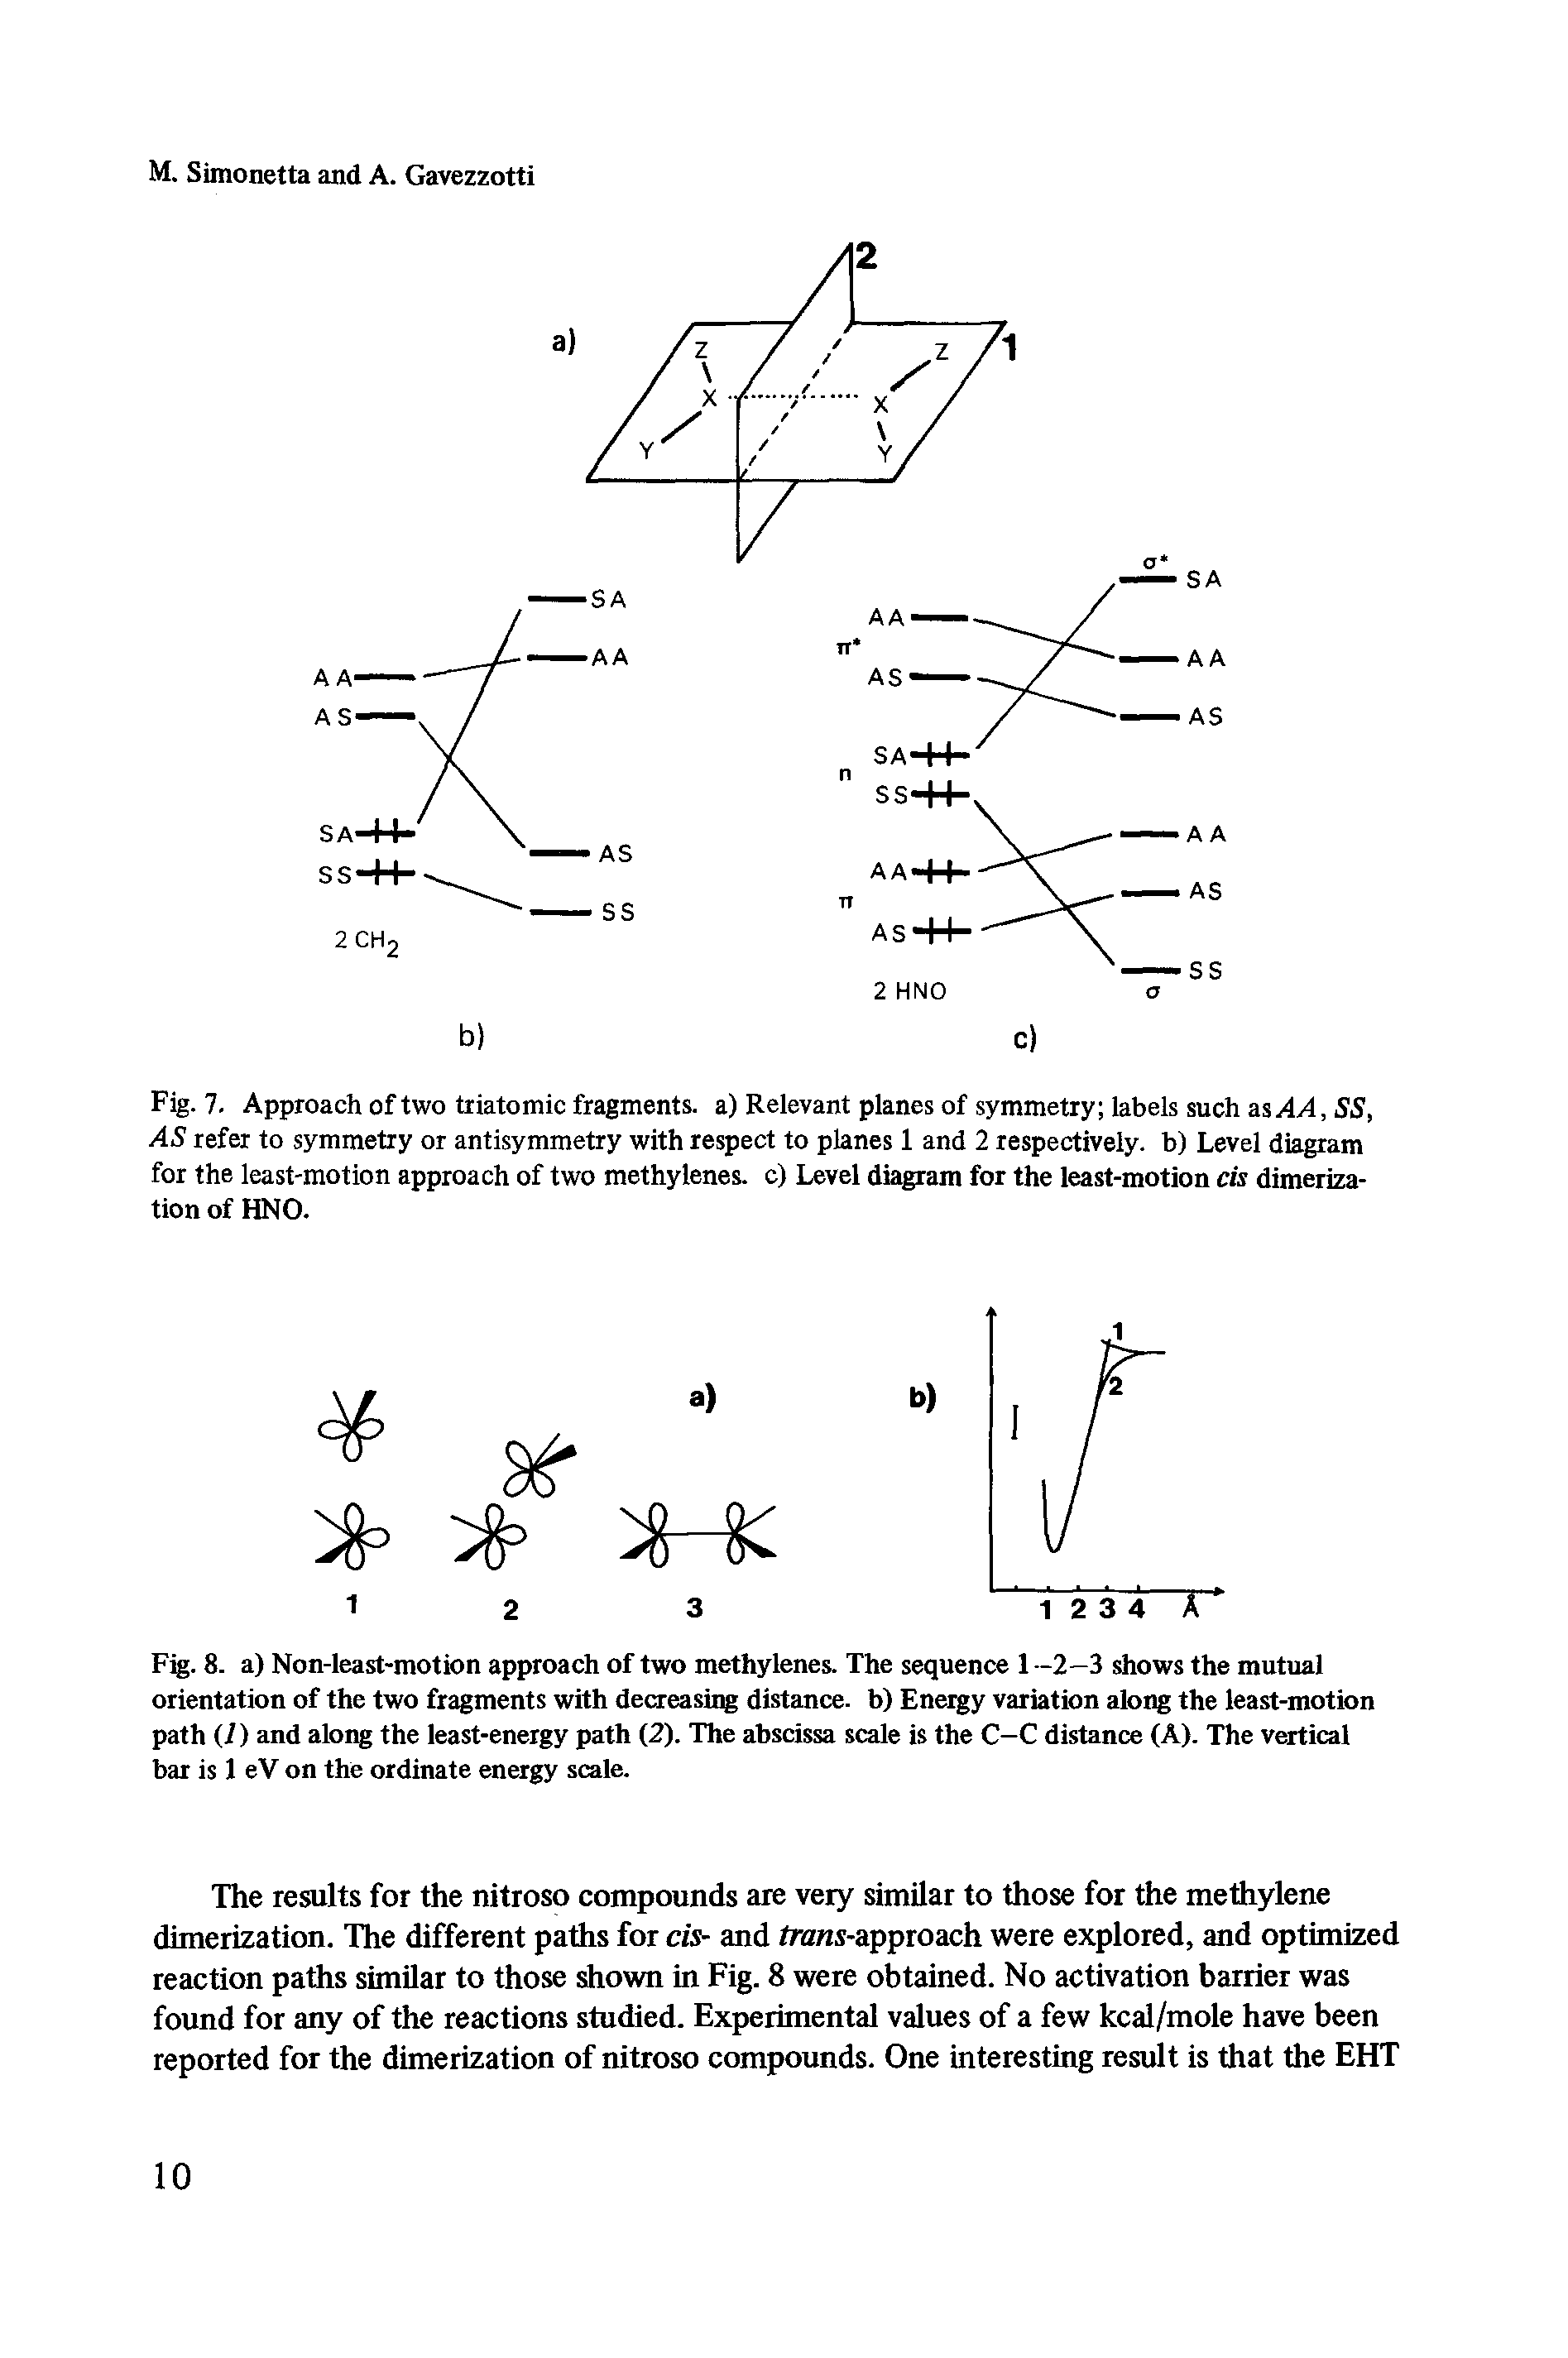 Fig. 7. Approach of two triatomic fragments, a) Relevant planes of symmetry labels such as AA, SS, AS refer to symmetry or antisymmetry with respect to planes 1 and 2 respectively, b) Level diagram for the least-motion approach of two methylenes, c) Level diagram for the least-motion cis dimerization of HNO.